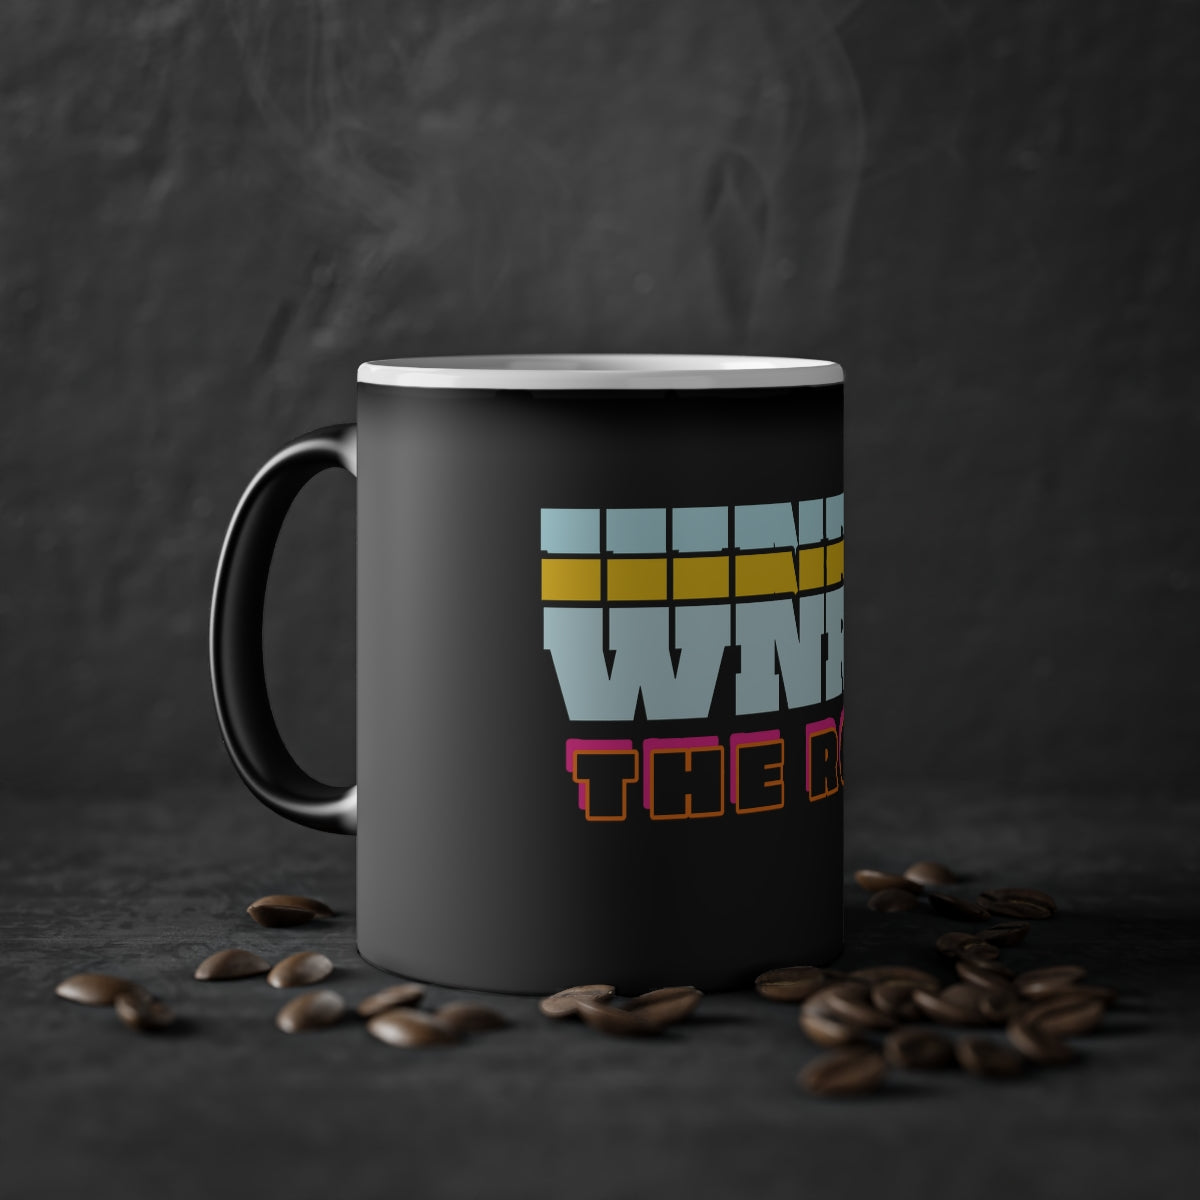 WNRM The Root Logo Magic Mug, 11oz, with coffee beans by the cup. with a black background